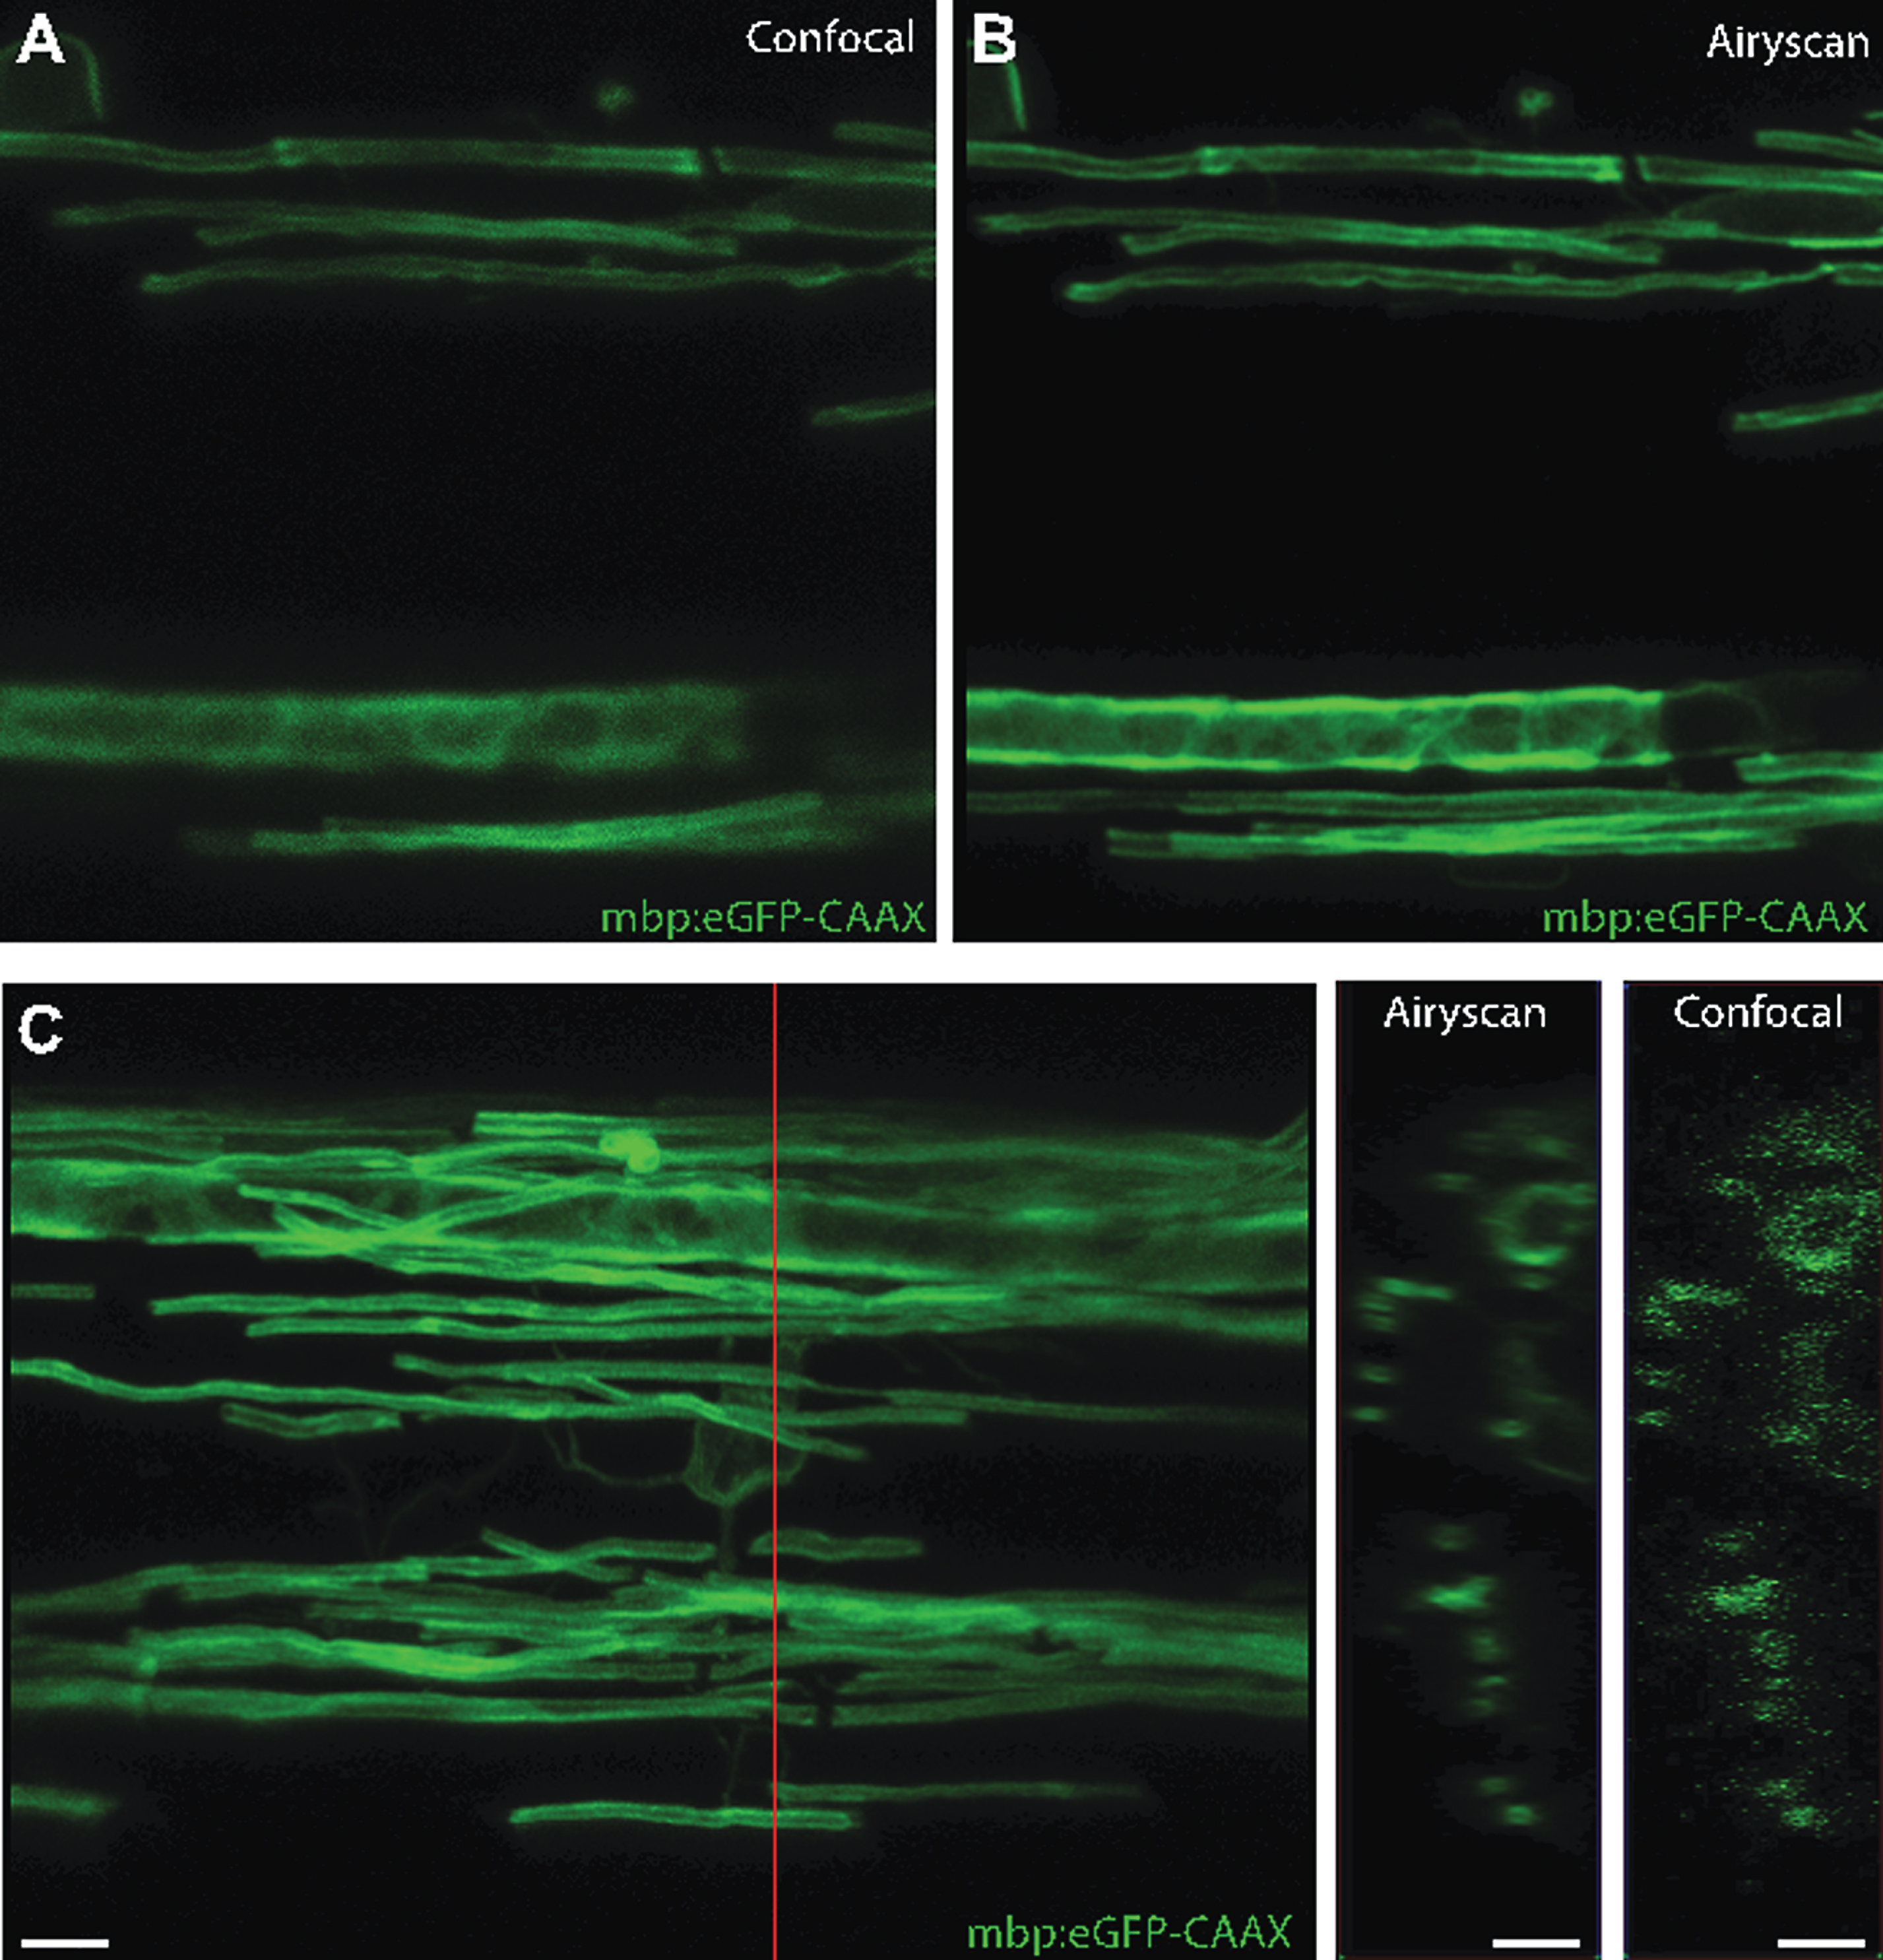 Confocal super-resolution imaging. A+B are images of the stable transgenic reporter mbp:eGFP-CAAX, which labels myelin sheaths, taken in confocal (A) and Airyscan (B) modes. A clear improvement in resolution in the X-Y plan is observed. C indicates improvement in z-axis resolution in Airyscan mode. The red line indicates the position where the Y-Z projections on the right were taken. Definitive circular rings of myelin membrane are observable in the Airyscan mode. Scale bars = 5 μm.